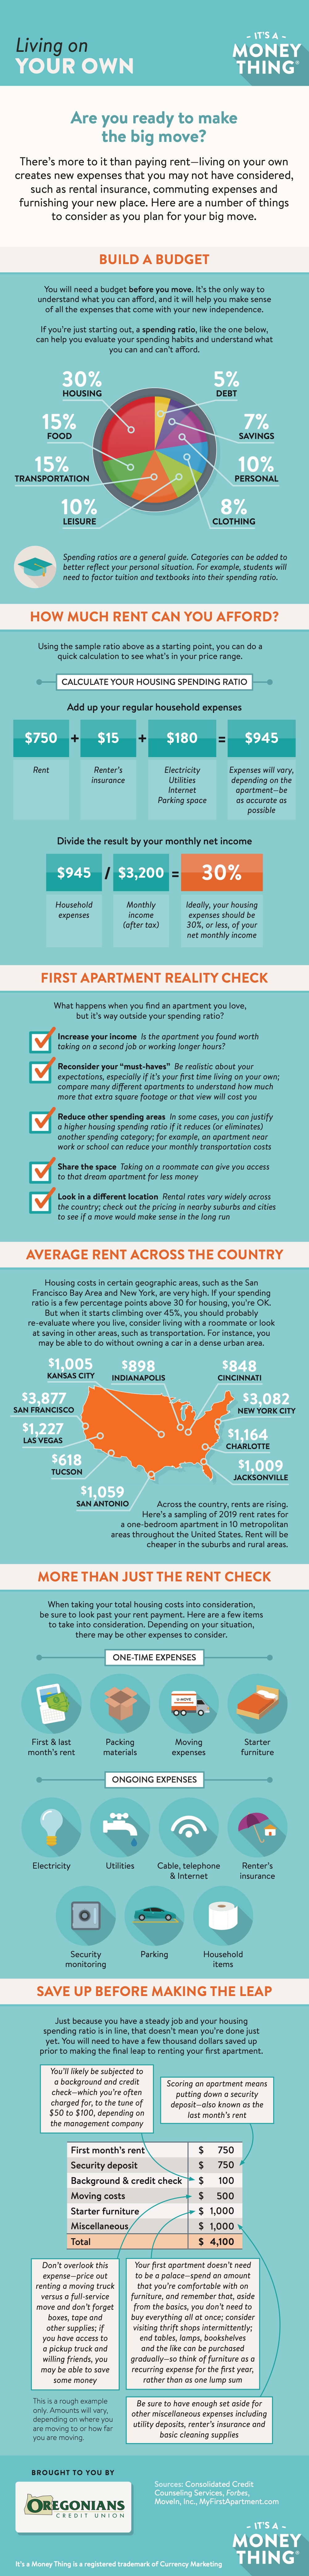 Living on Your Own Infographic